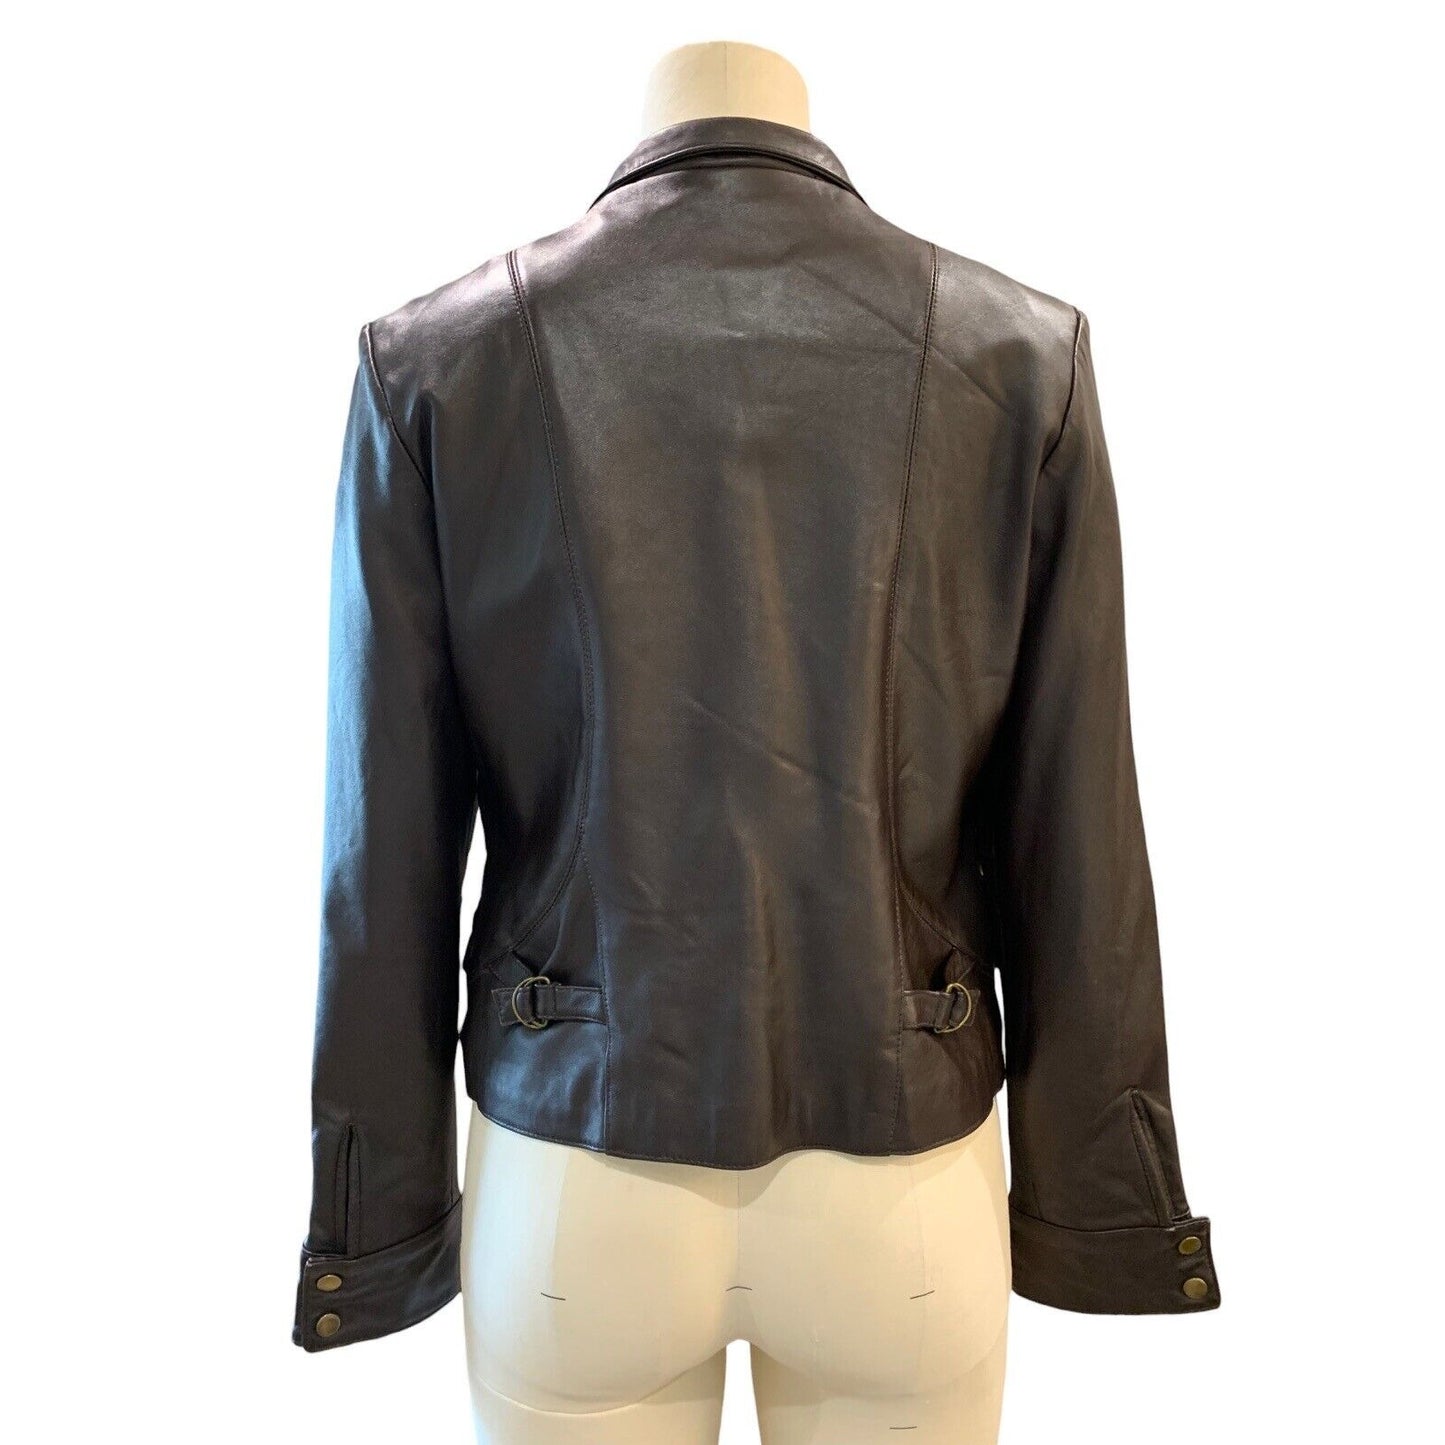 back view of women's short leather jacket